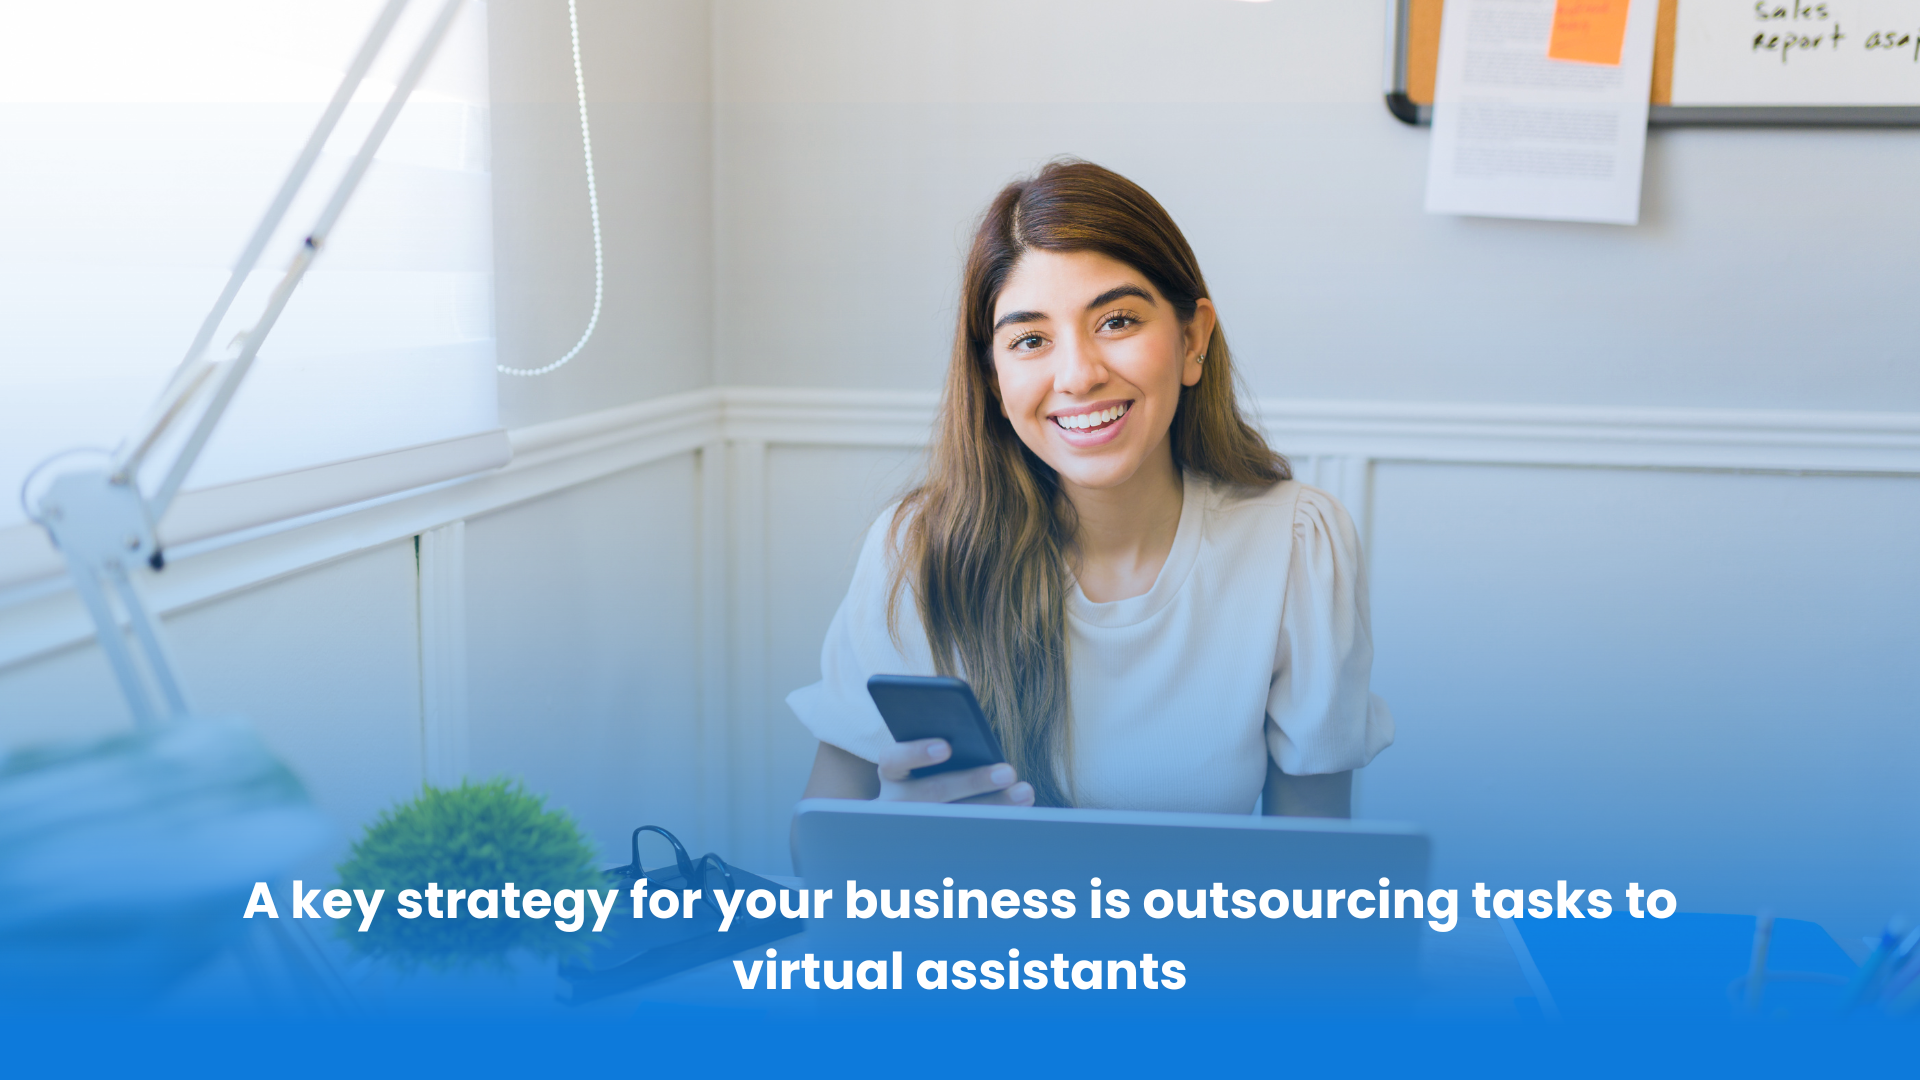 A key strategy for your business is outsourcing tasks to virtual assistants